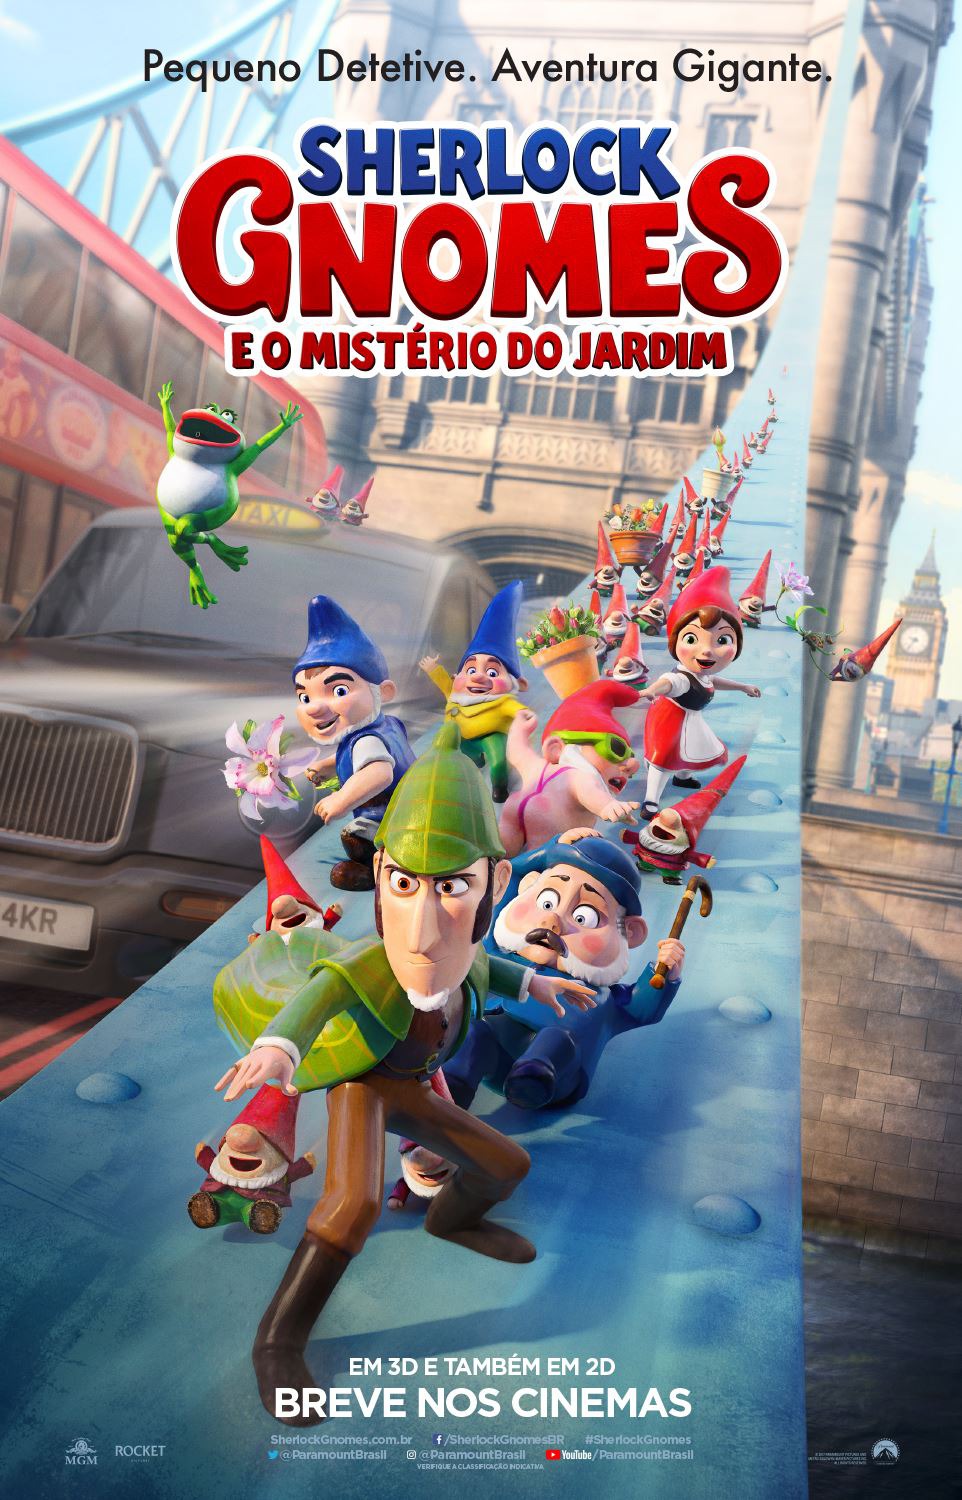 Extra Large Movie Poster Image for Gnomeo & Juliet: Sherlock Gnomes (#9 of 41)